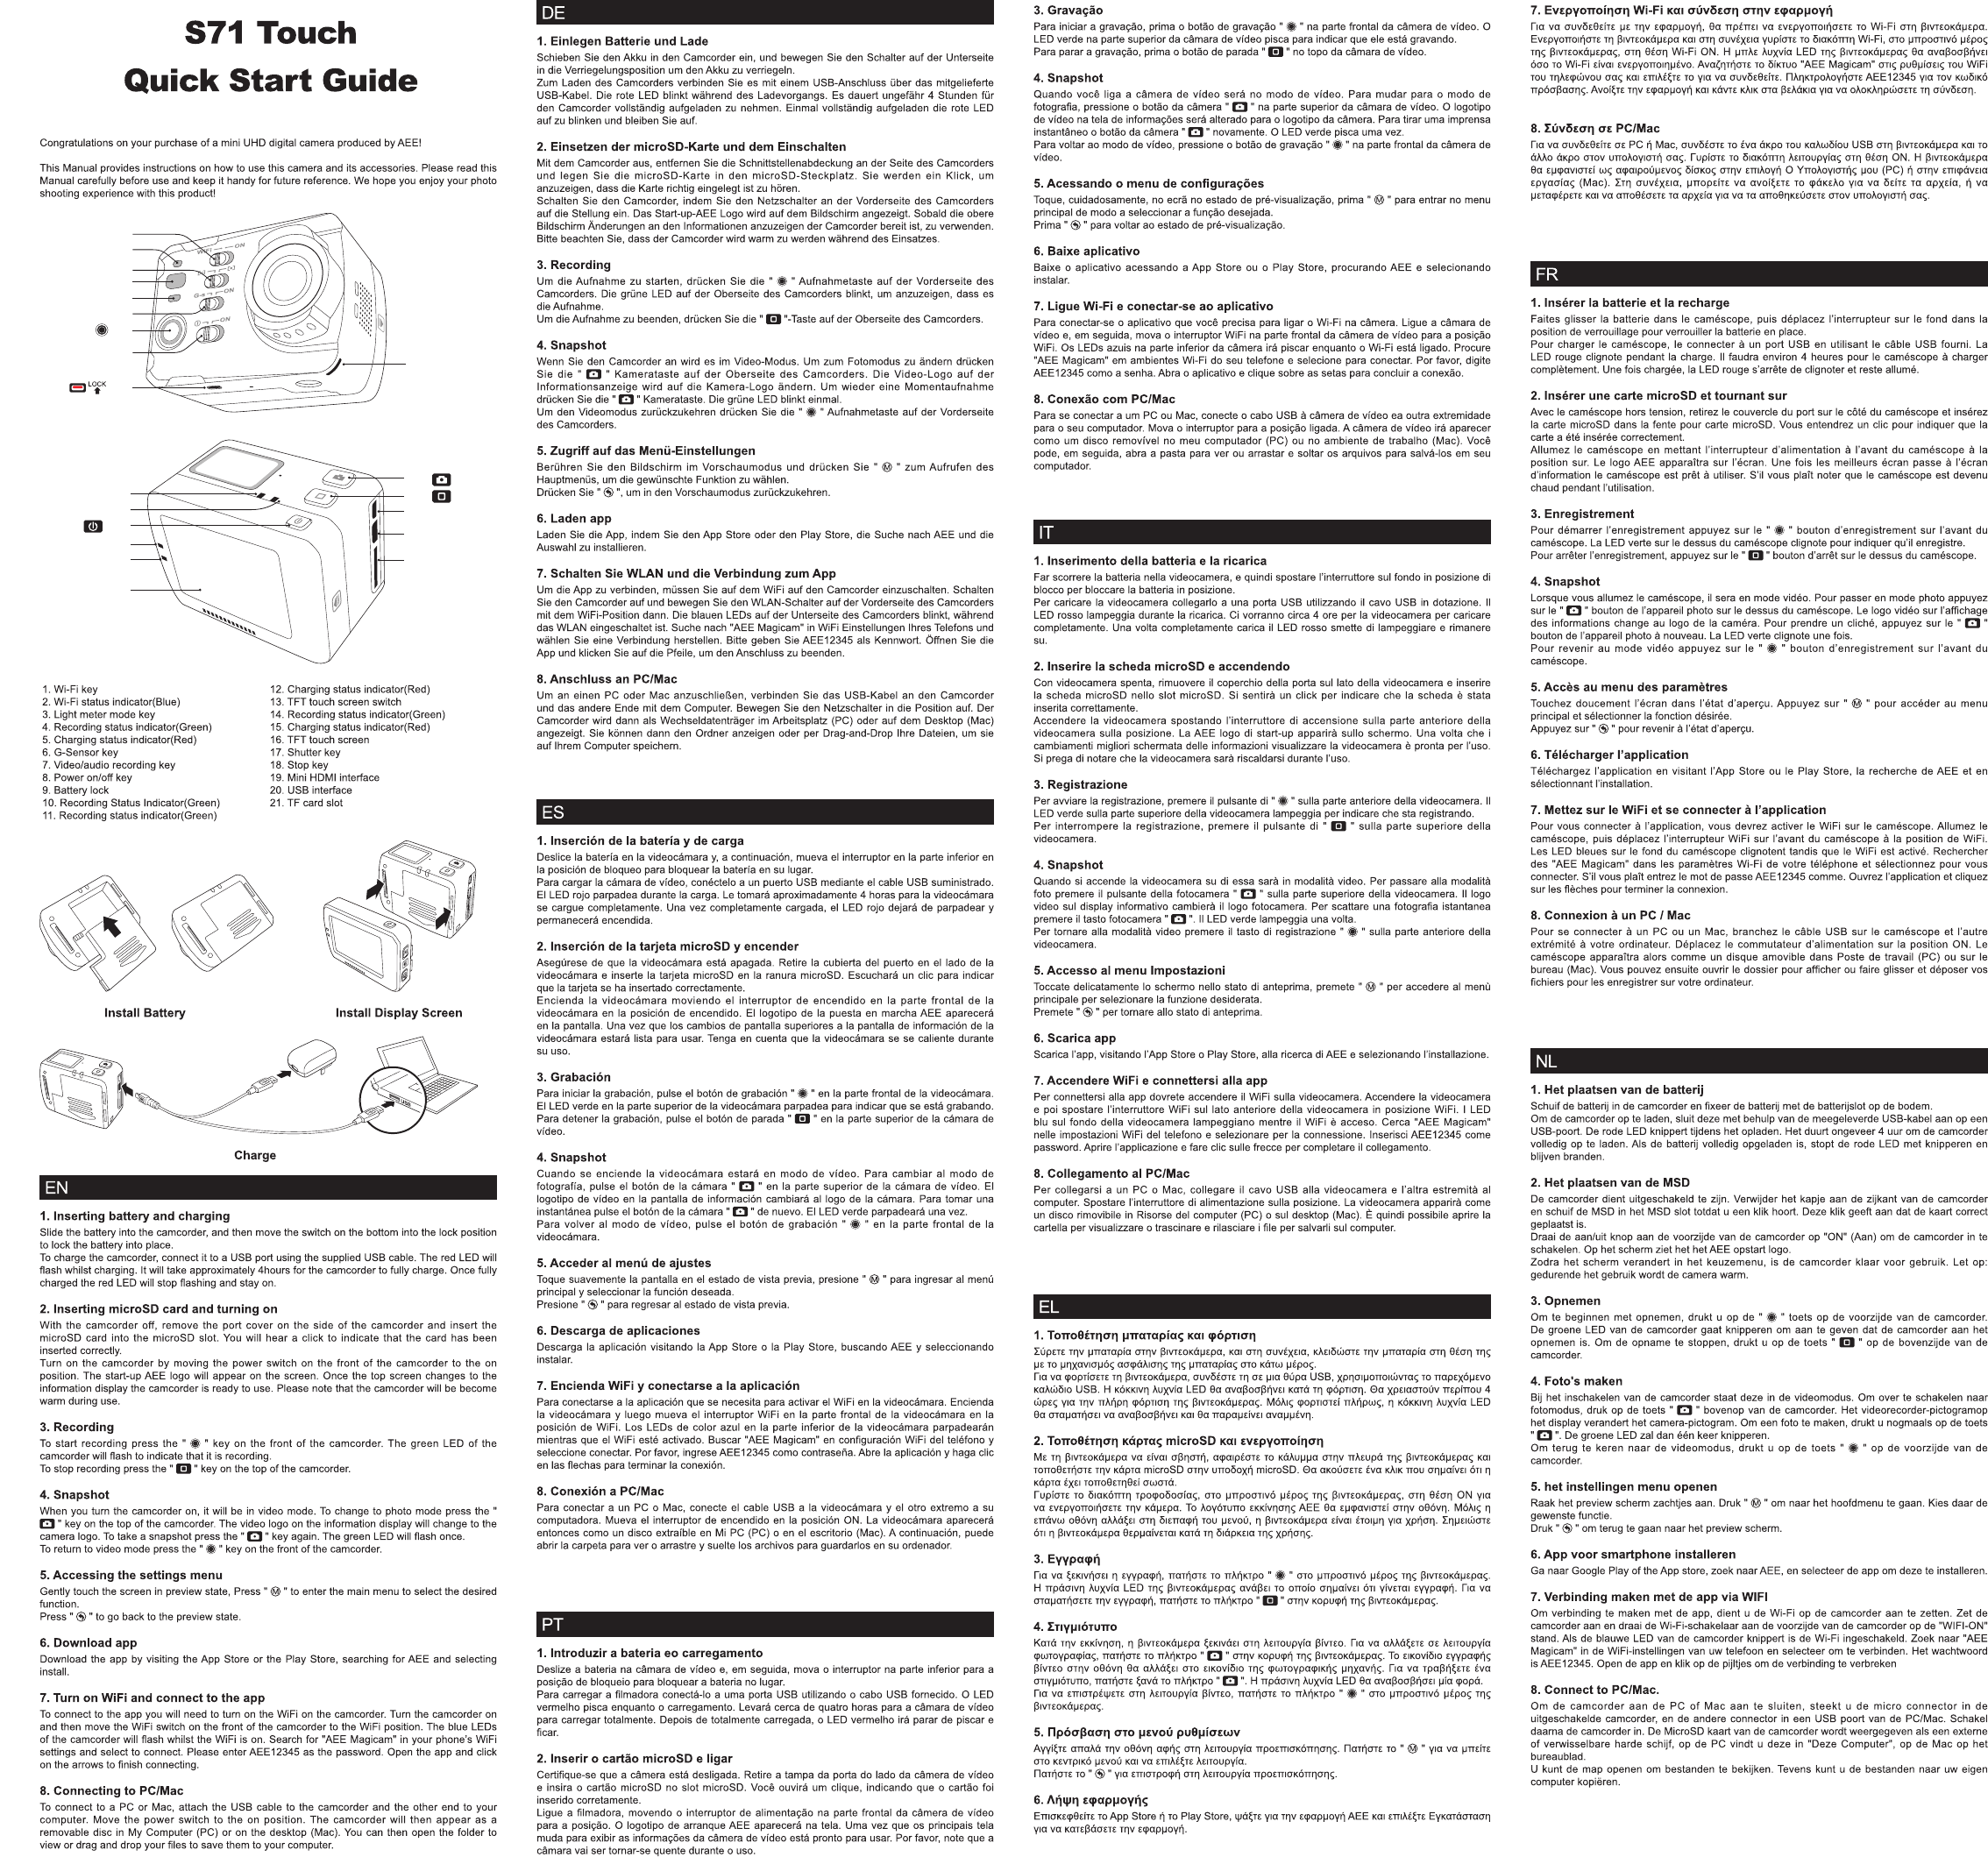 Manual AEE S71 Touch (page 1 of 2) (Danish, German, English, Spanish